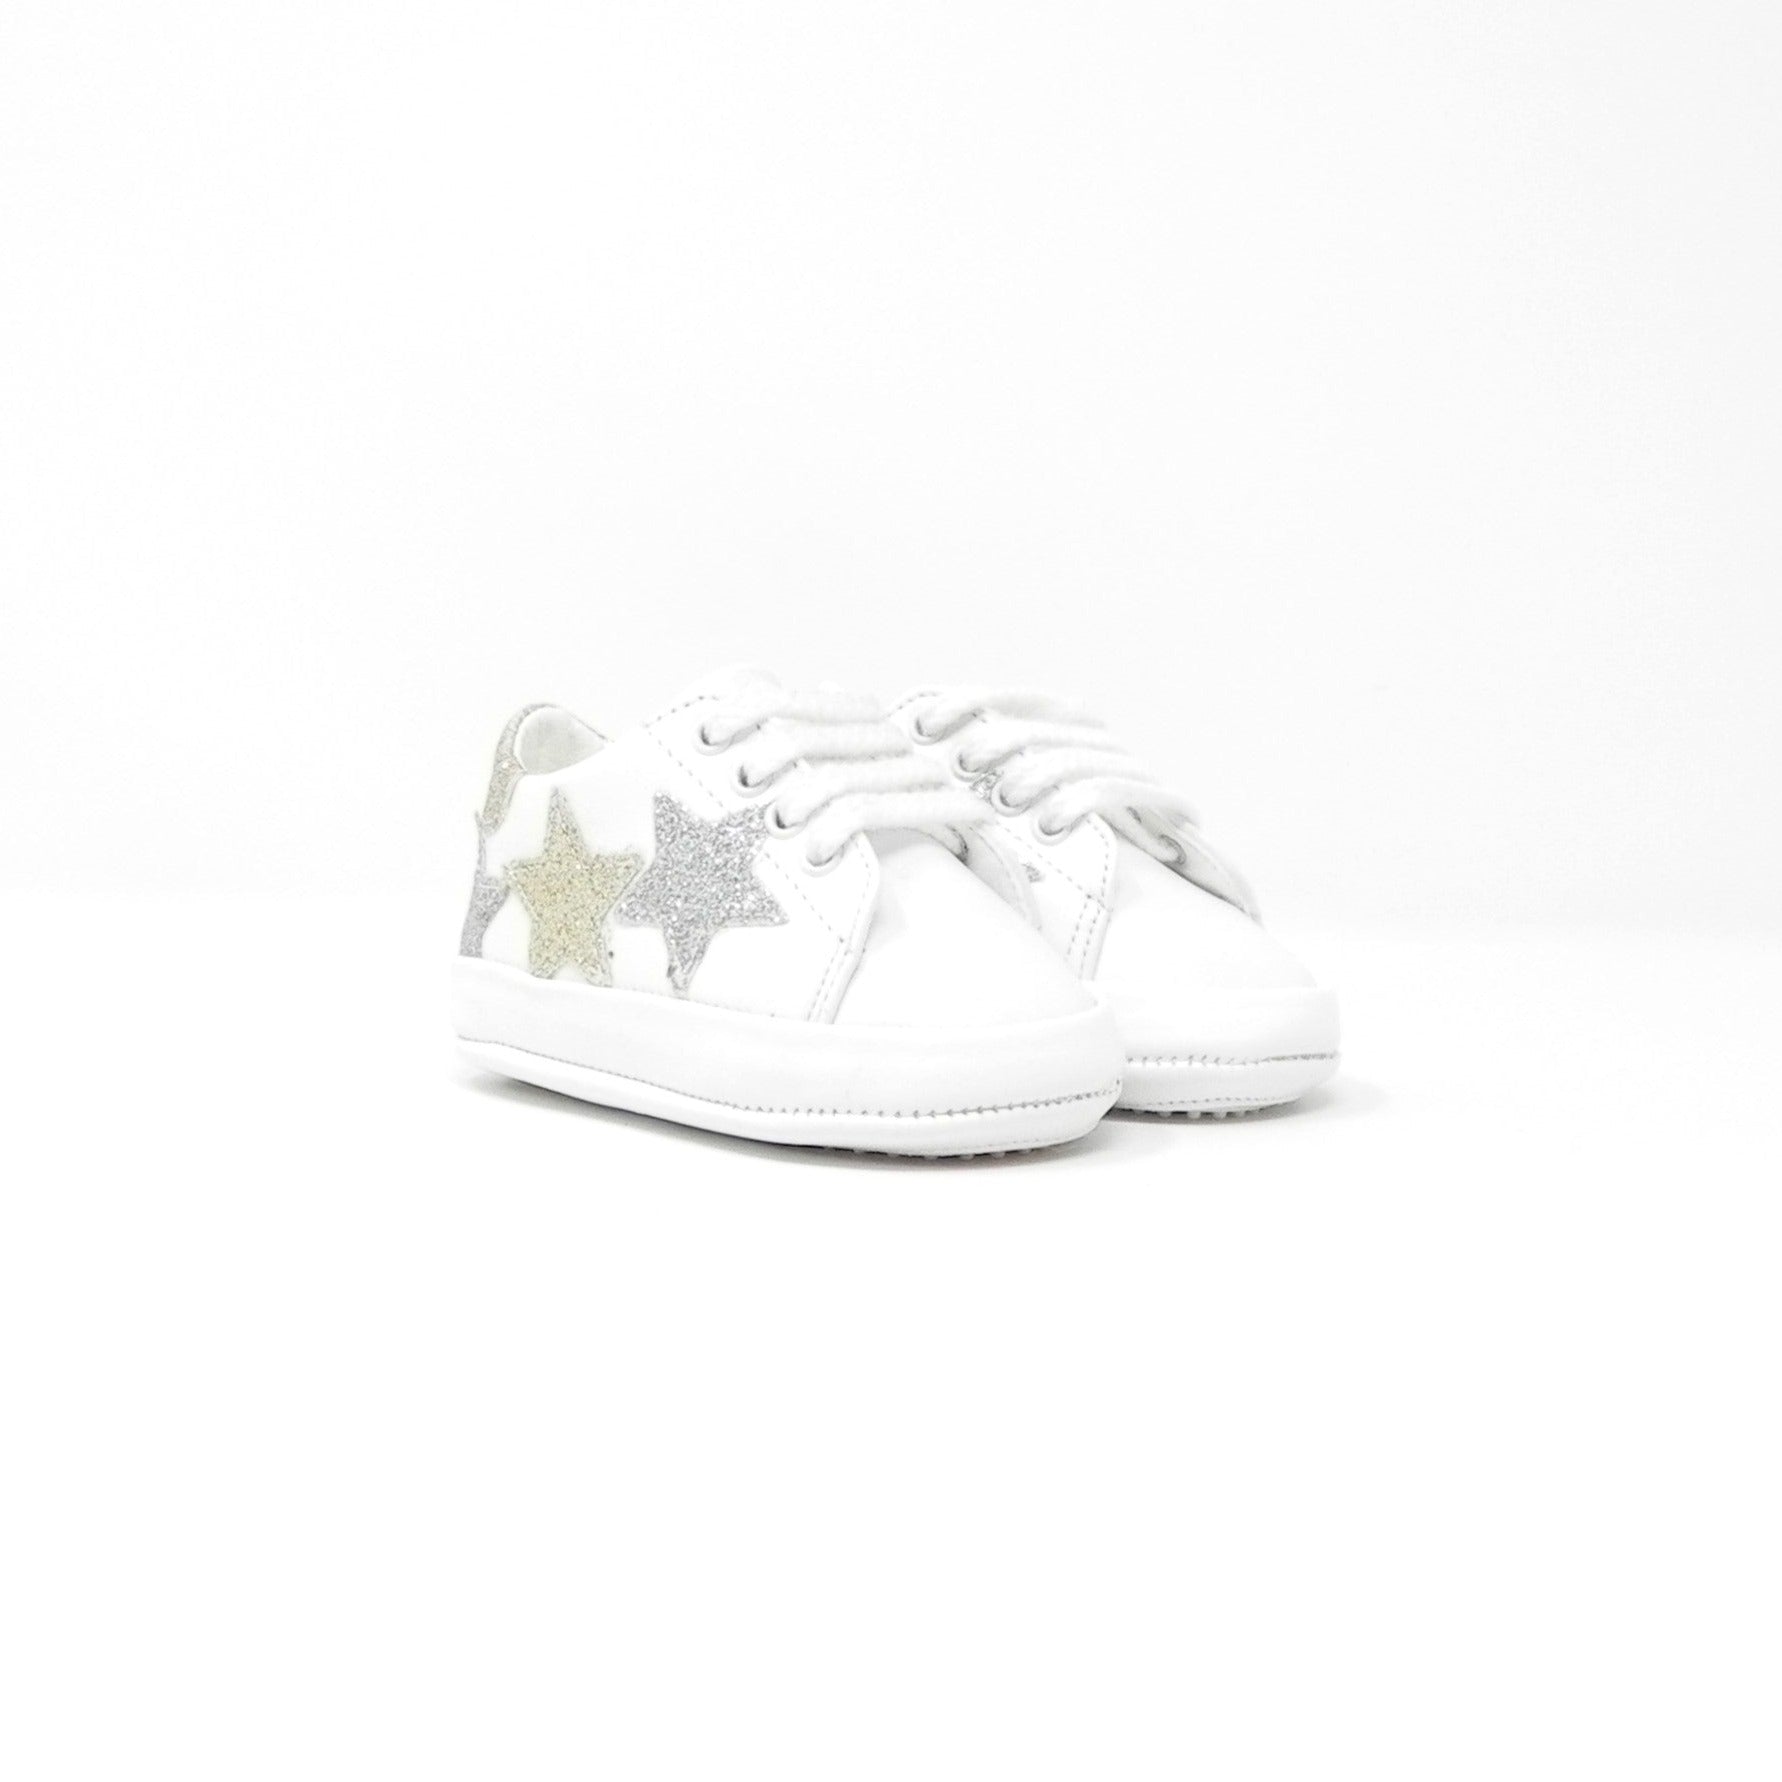 BABY CHICK - Sneakers Culla in pelle